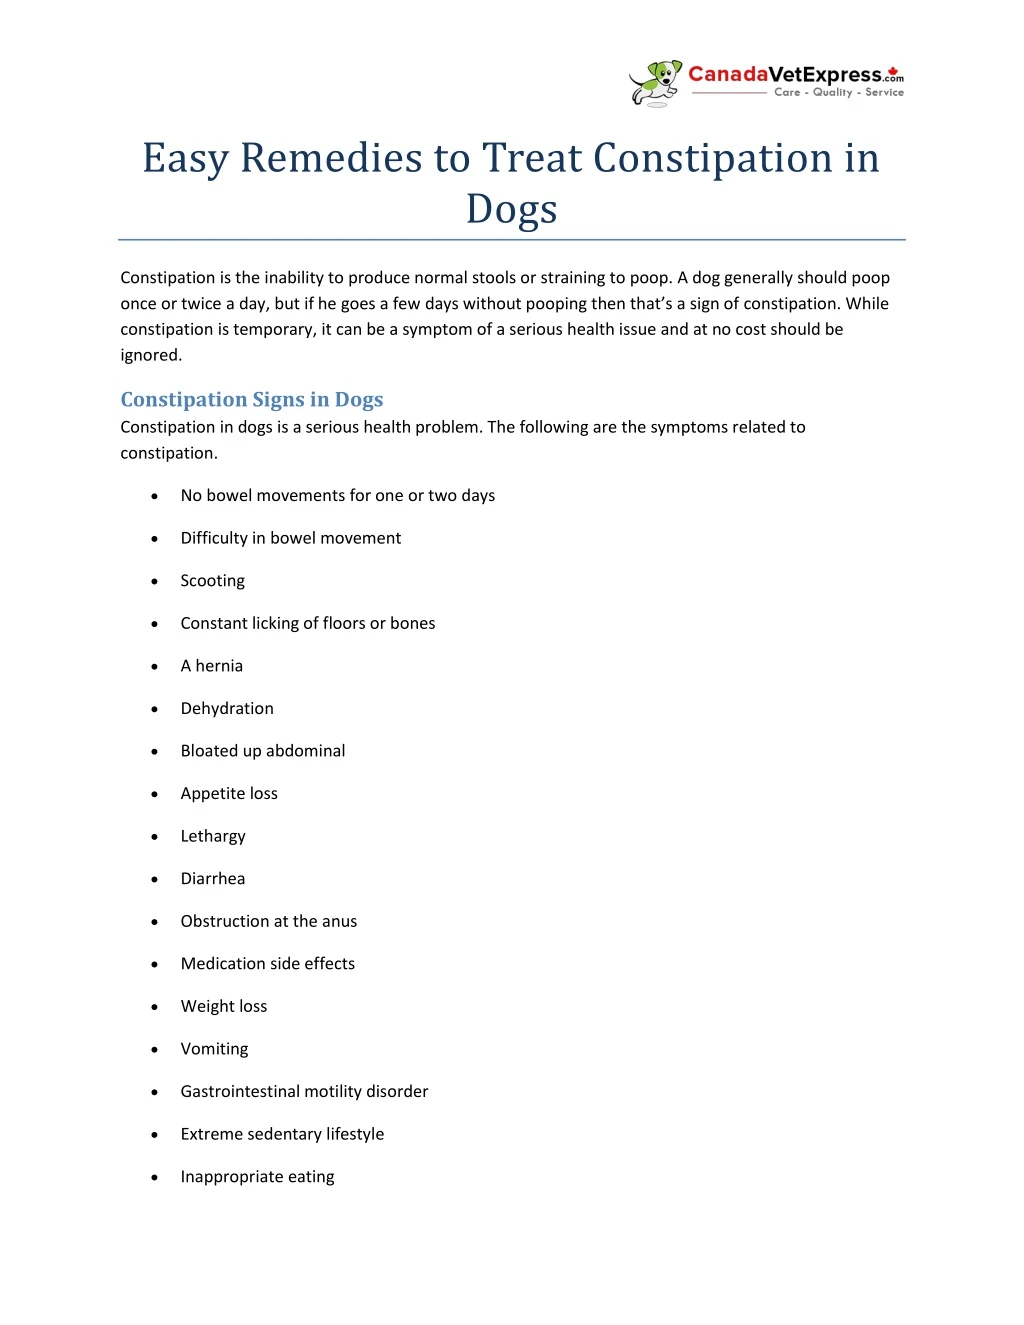 easy remedies to treat constipation in dogs